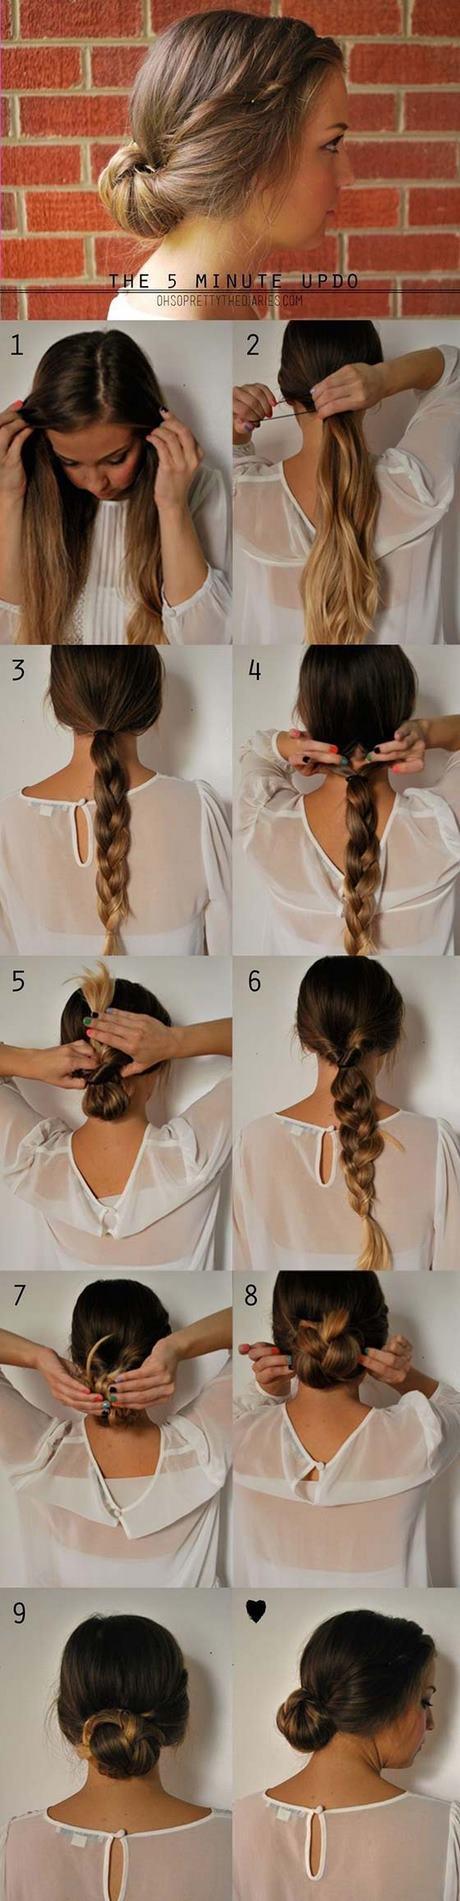 Cute up due hairstyles